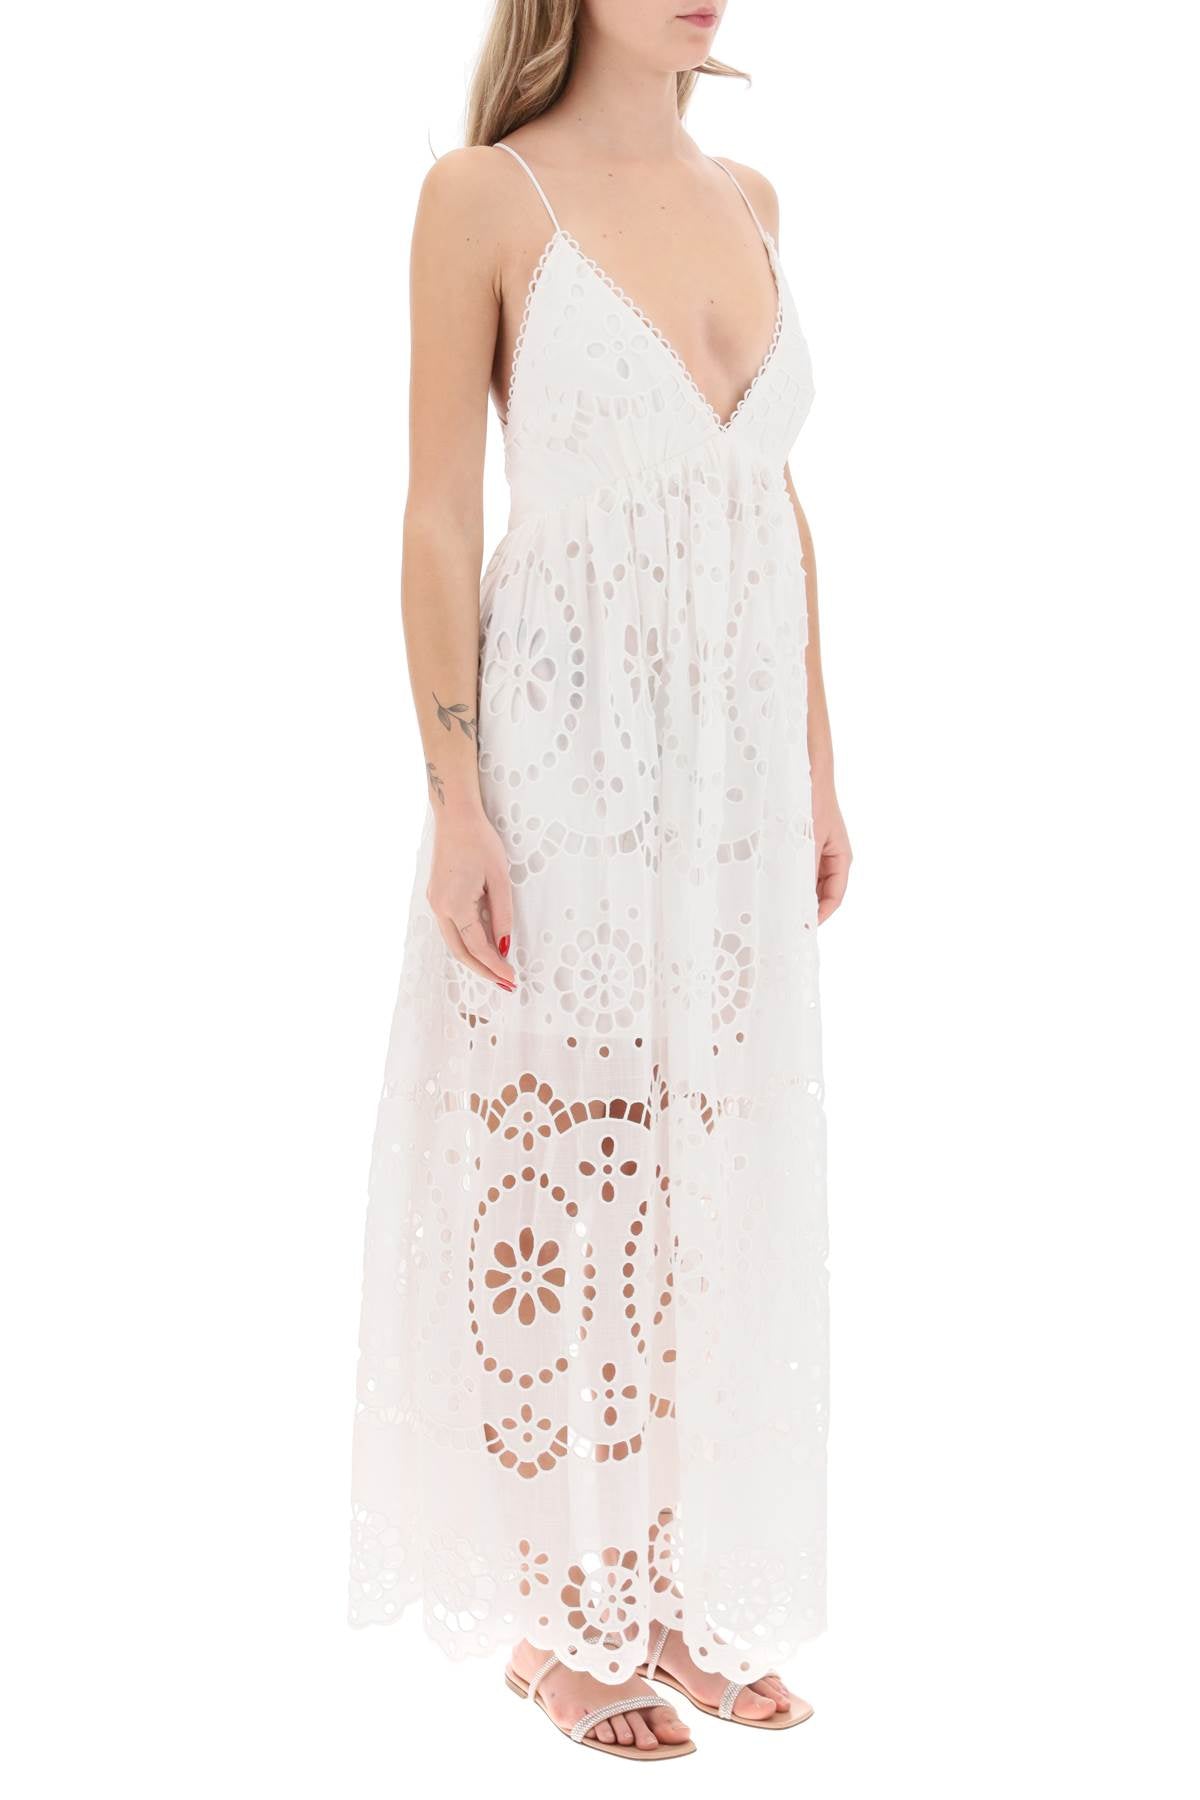 Zimmermann lexi maxi dress in broderie anglaise-1